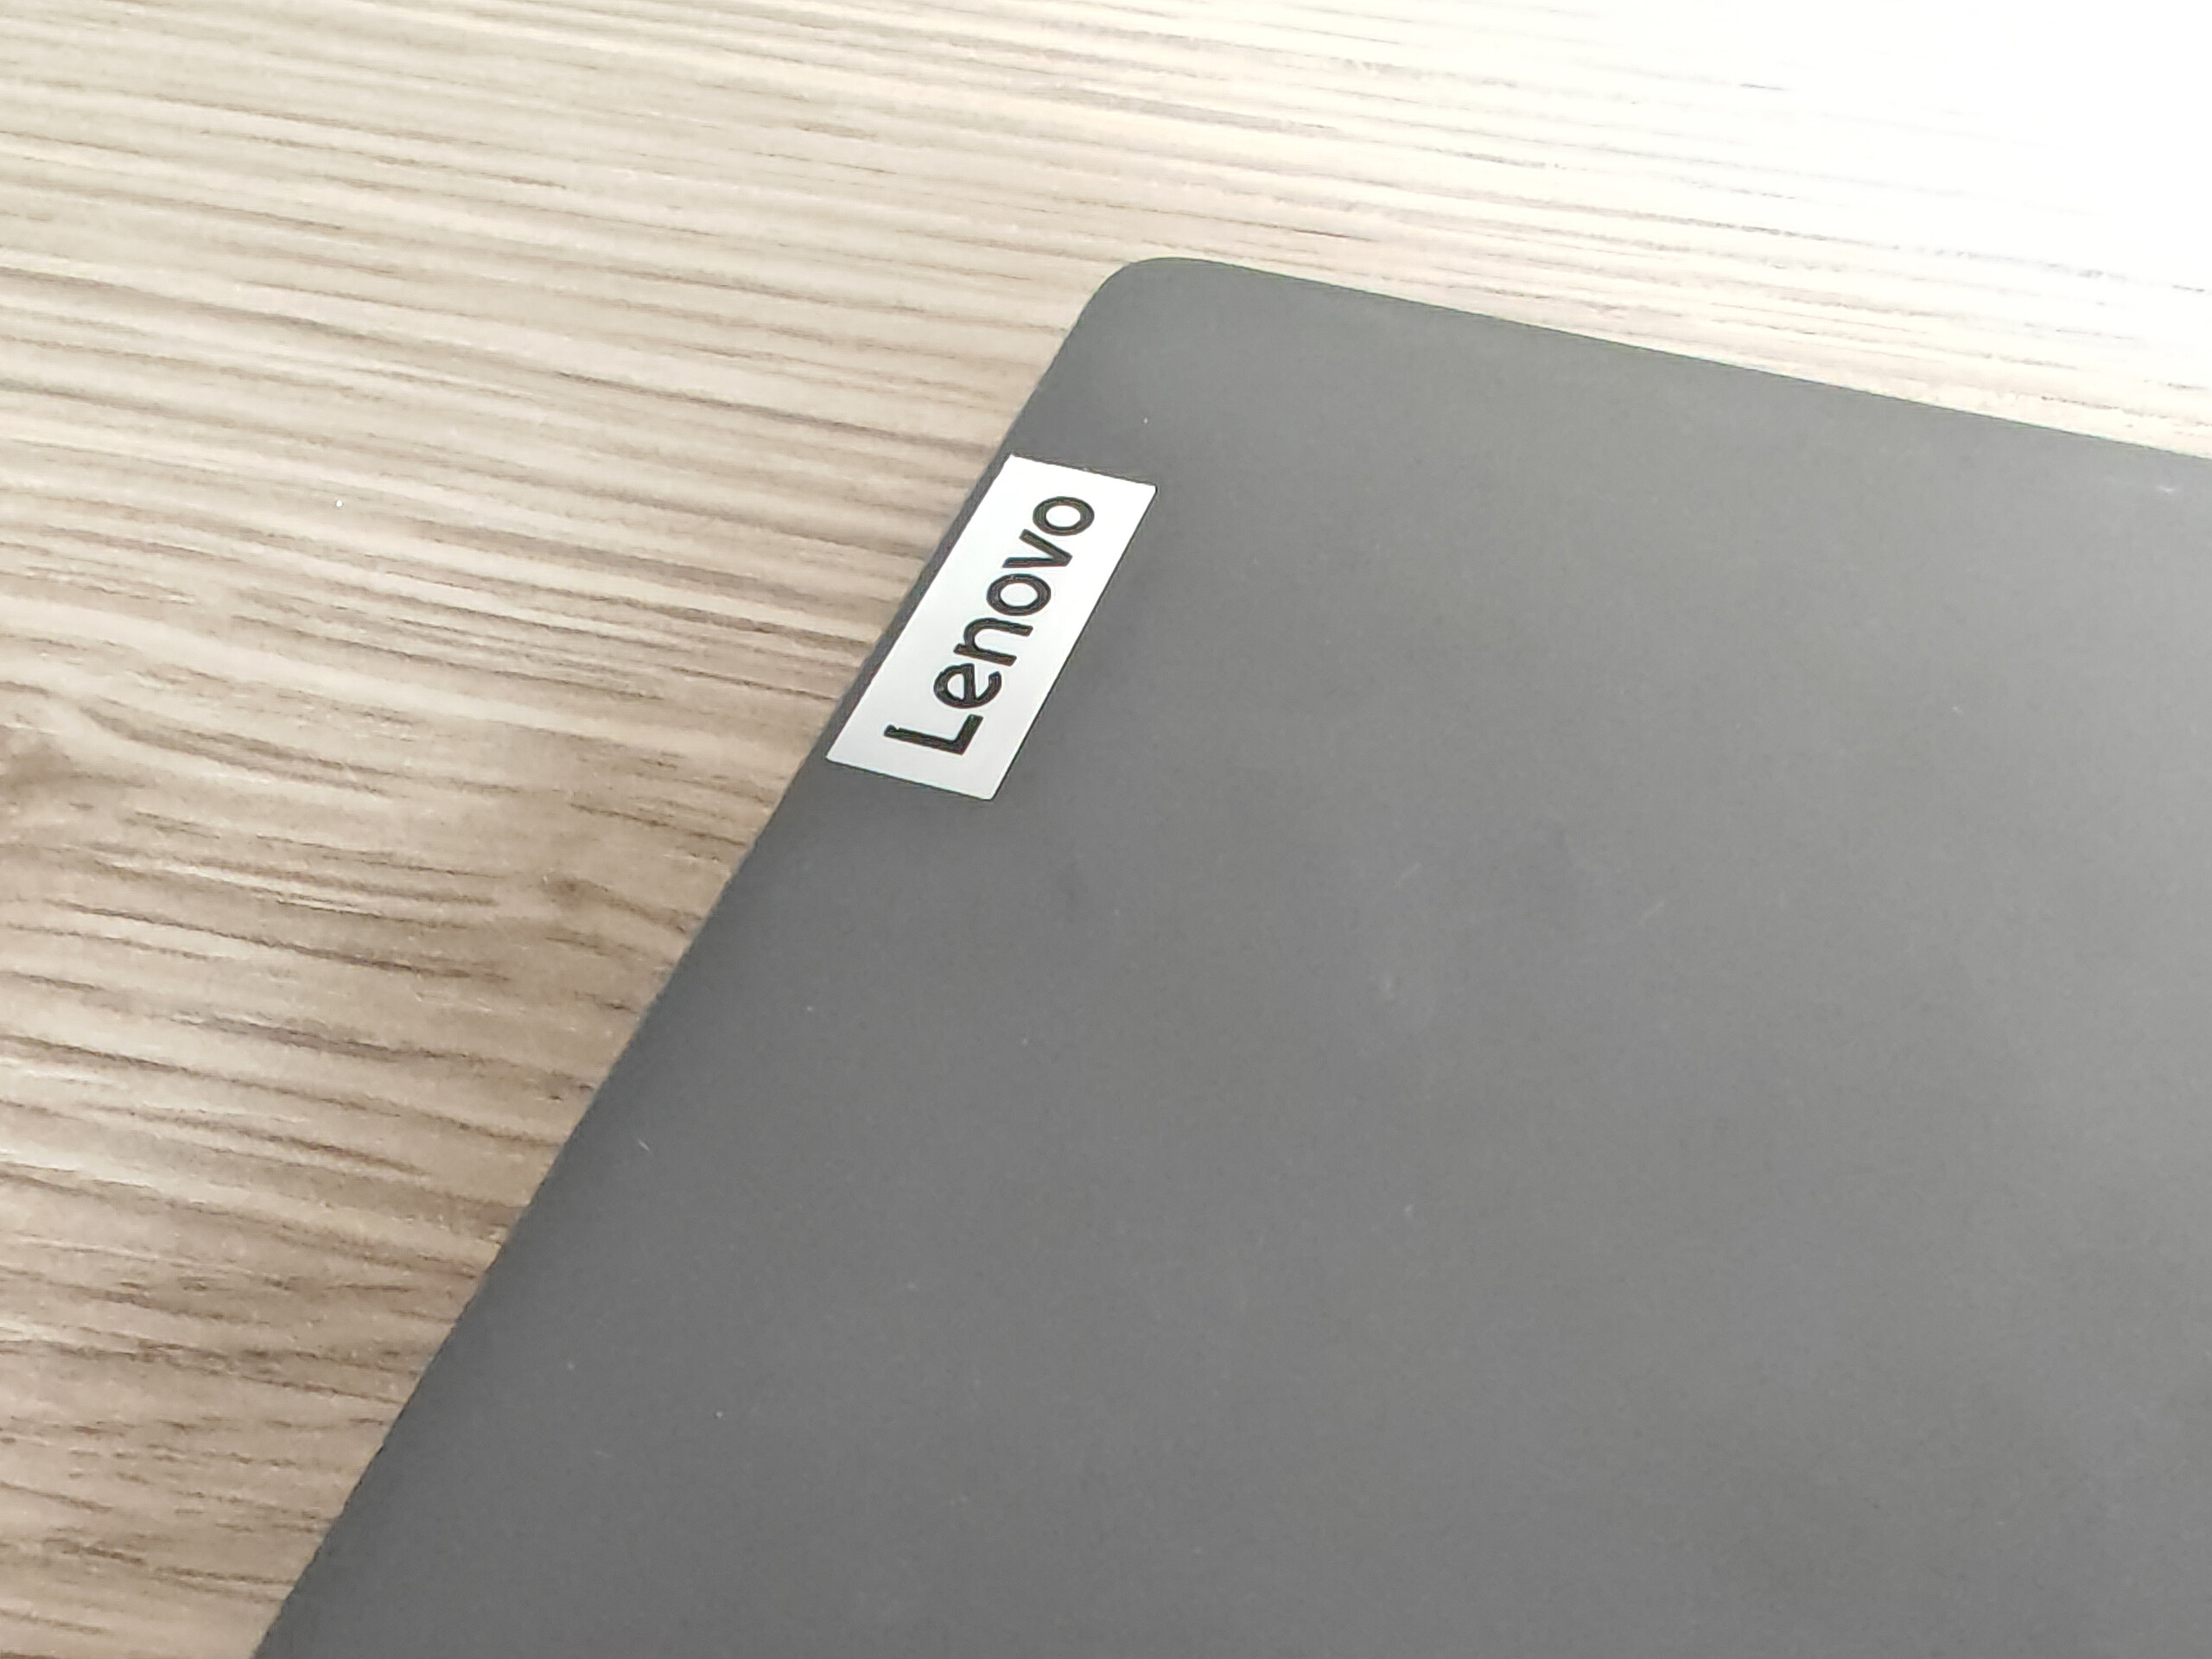 New E-Ink product: Lenovo Smart Paper──Lenovo's another E-Ink attempt –  E-Reader Pro